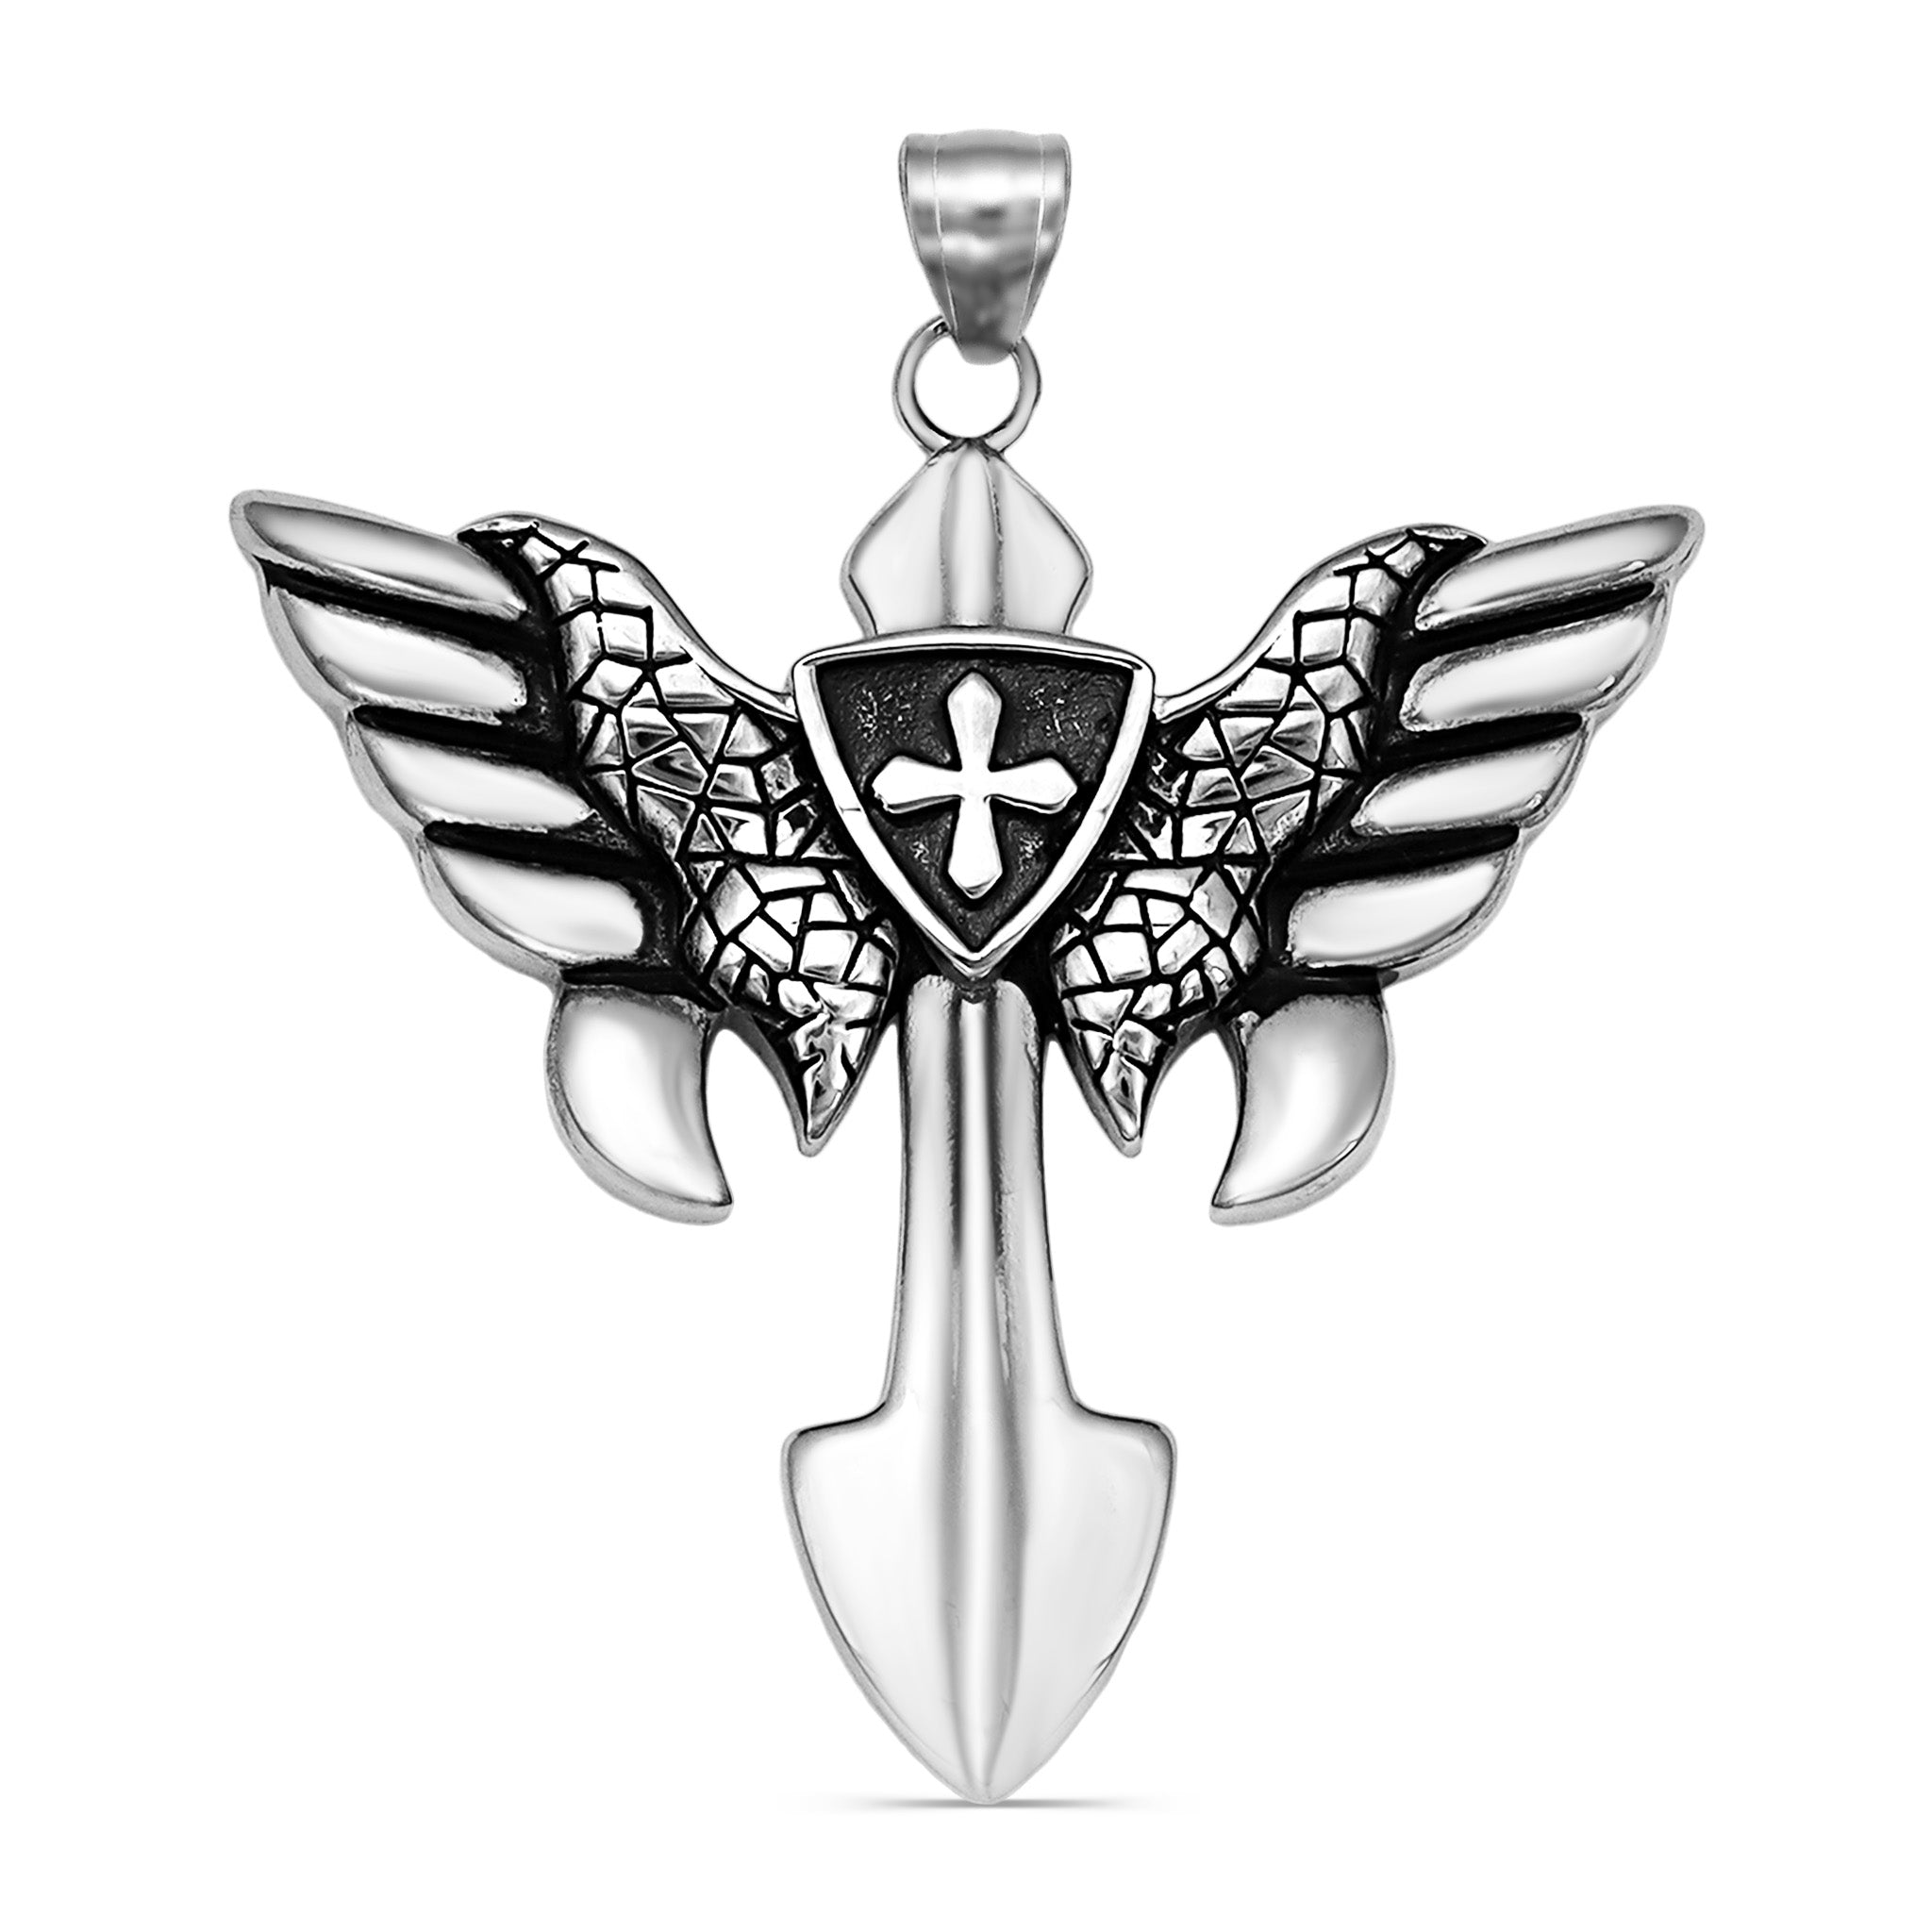 Stainless Steel Cross With Wings Pendant / PDL2008